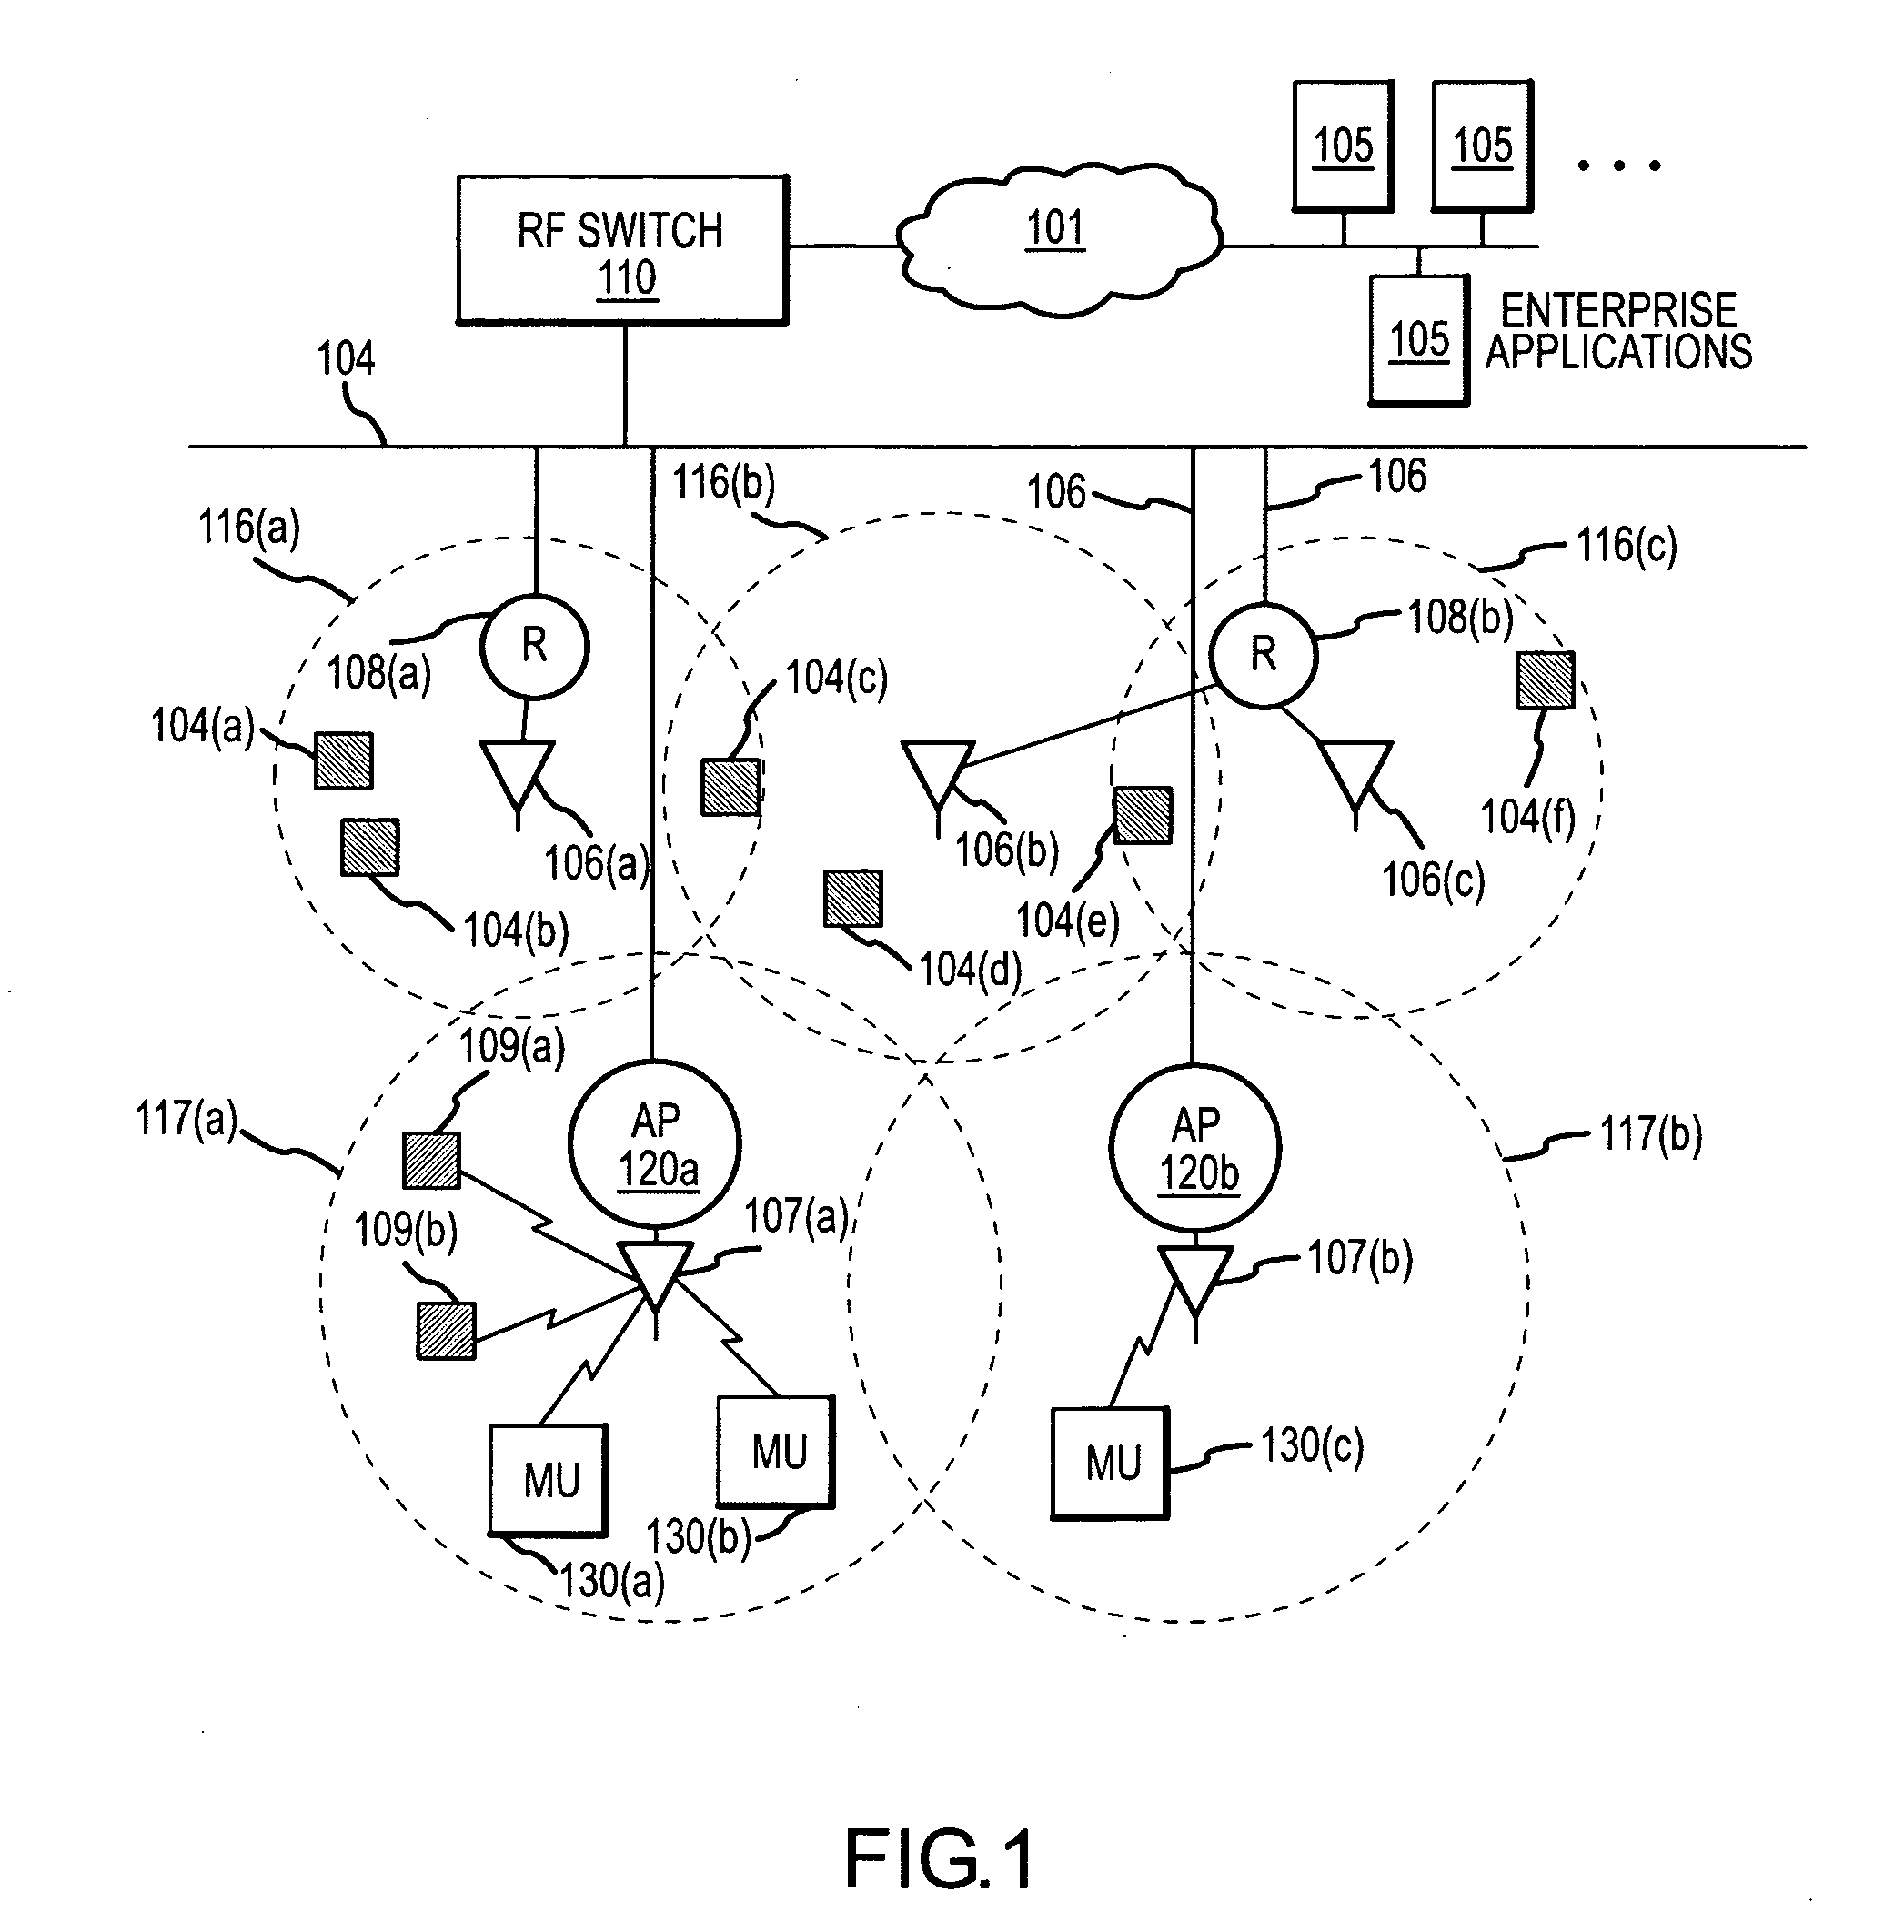 Methods and apparatus for defining, storing, and identifying key performance indicators associated with an RF network